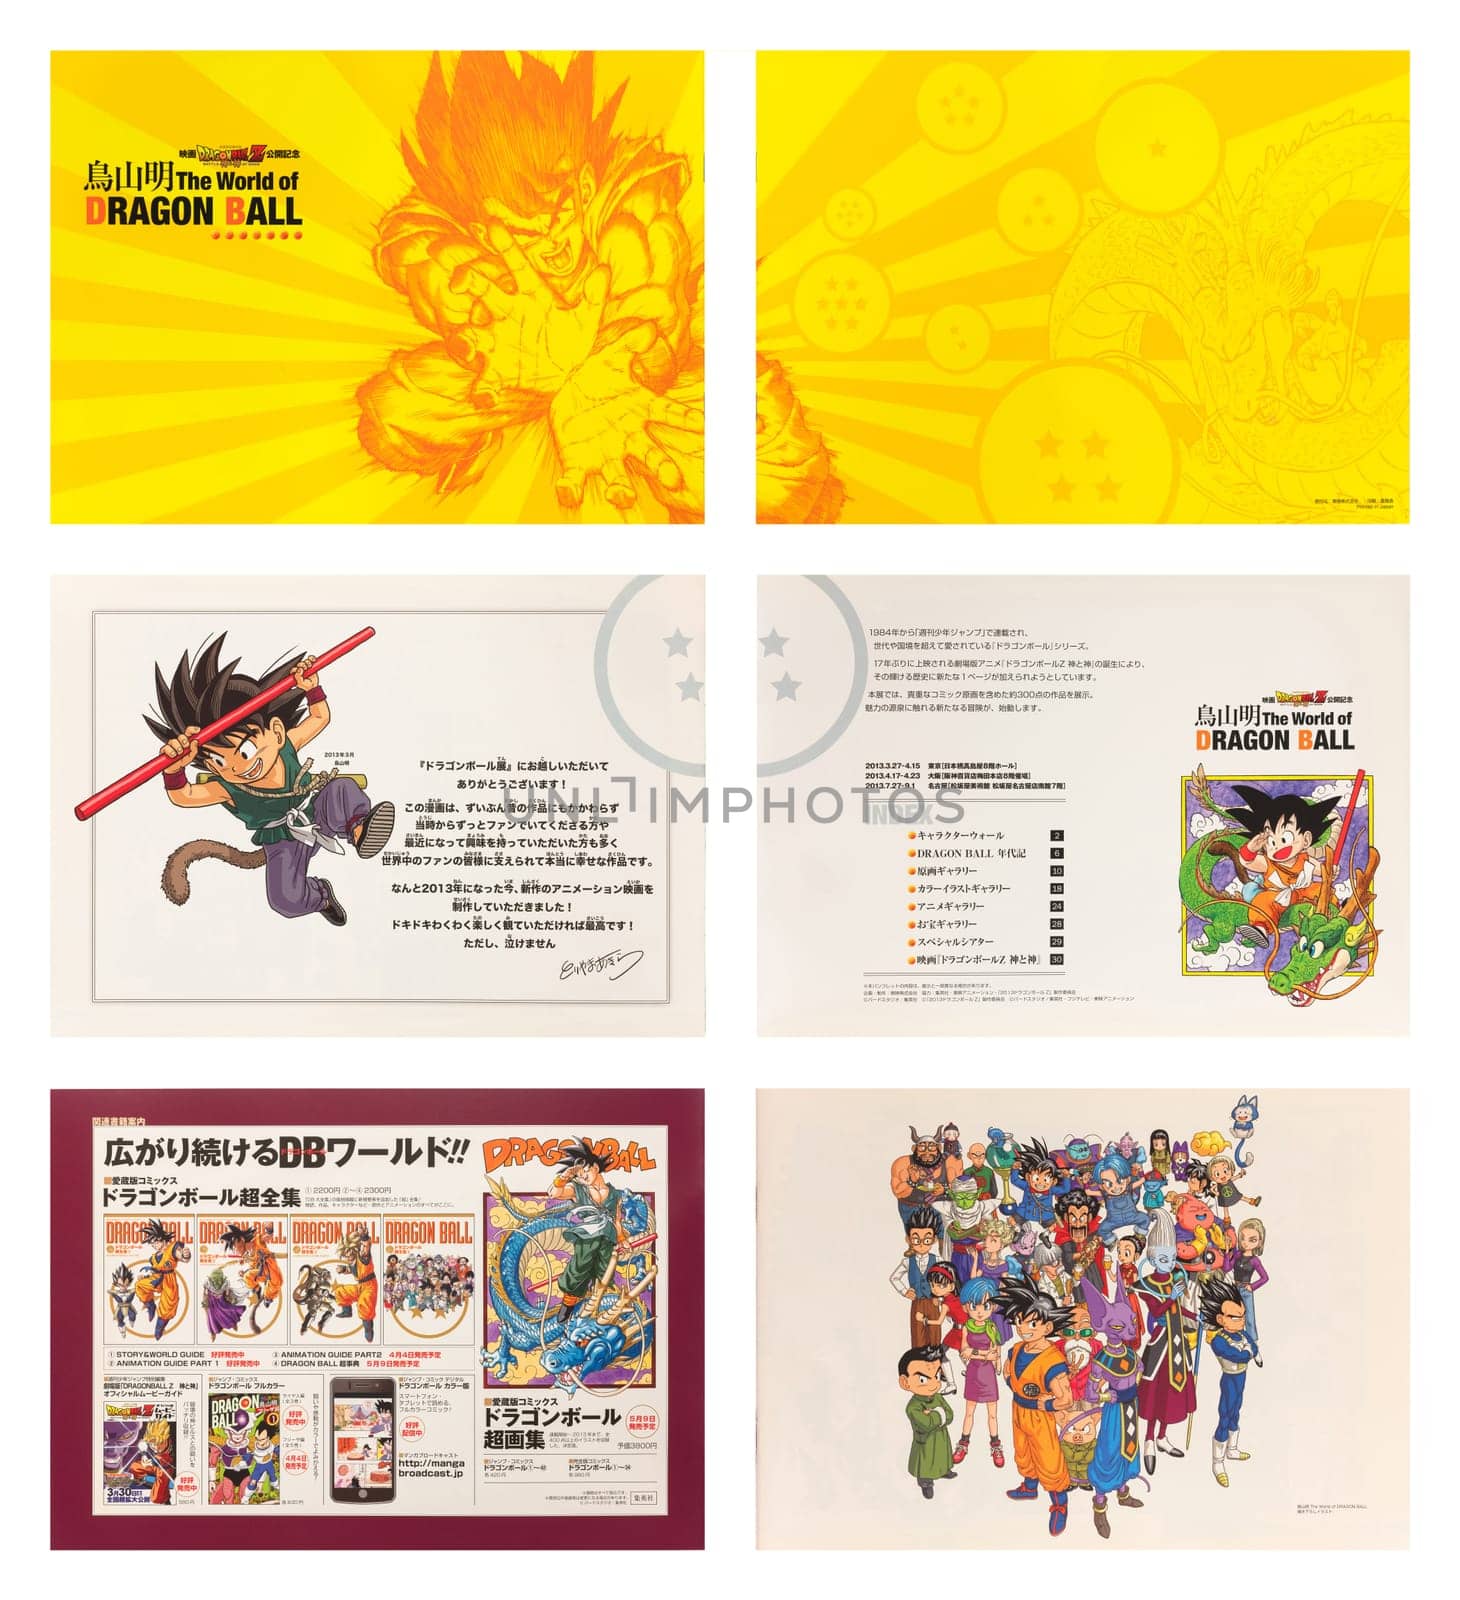 Pamphlet of the exhibition "Akira Toriyama The World of DRAGONBALL" held in 2013. by kuremo